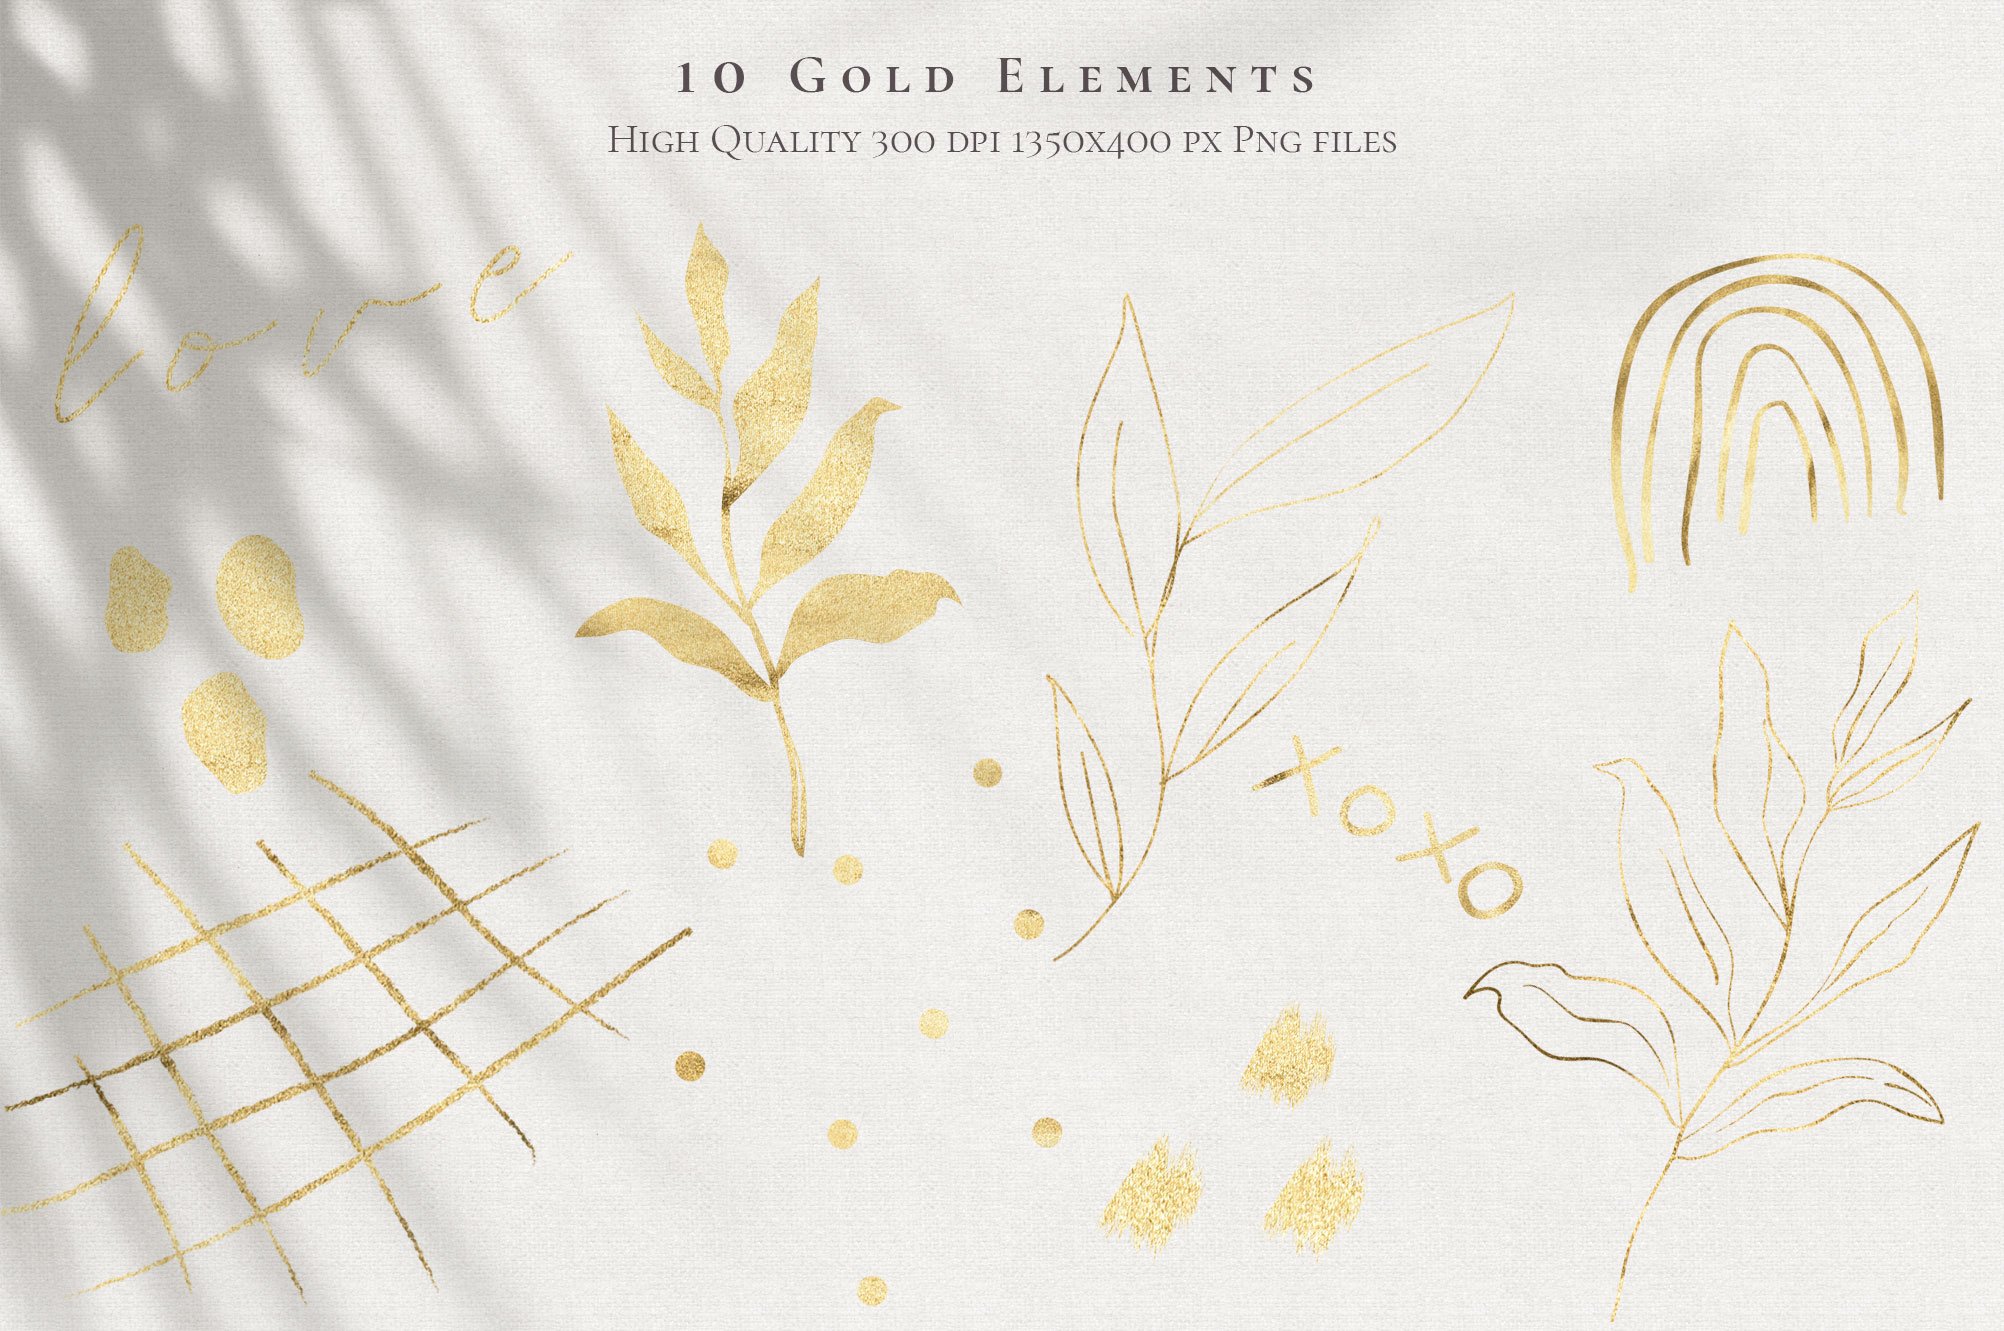 Watercolor Shapes & Gold Elements PNG Overlays